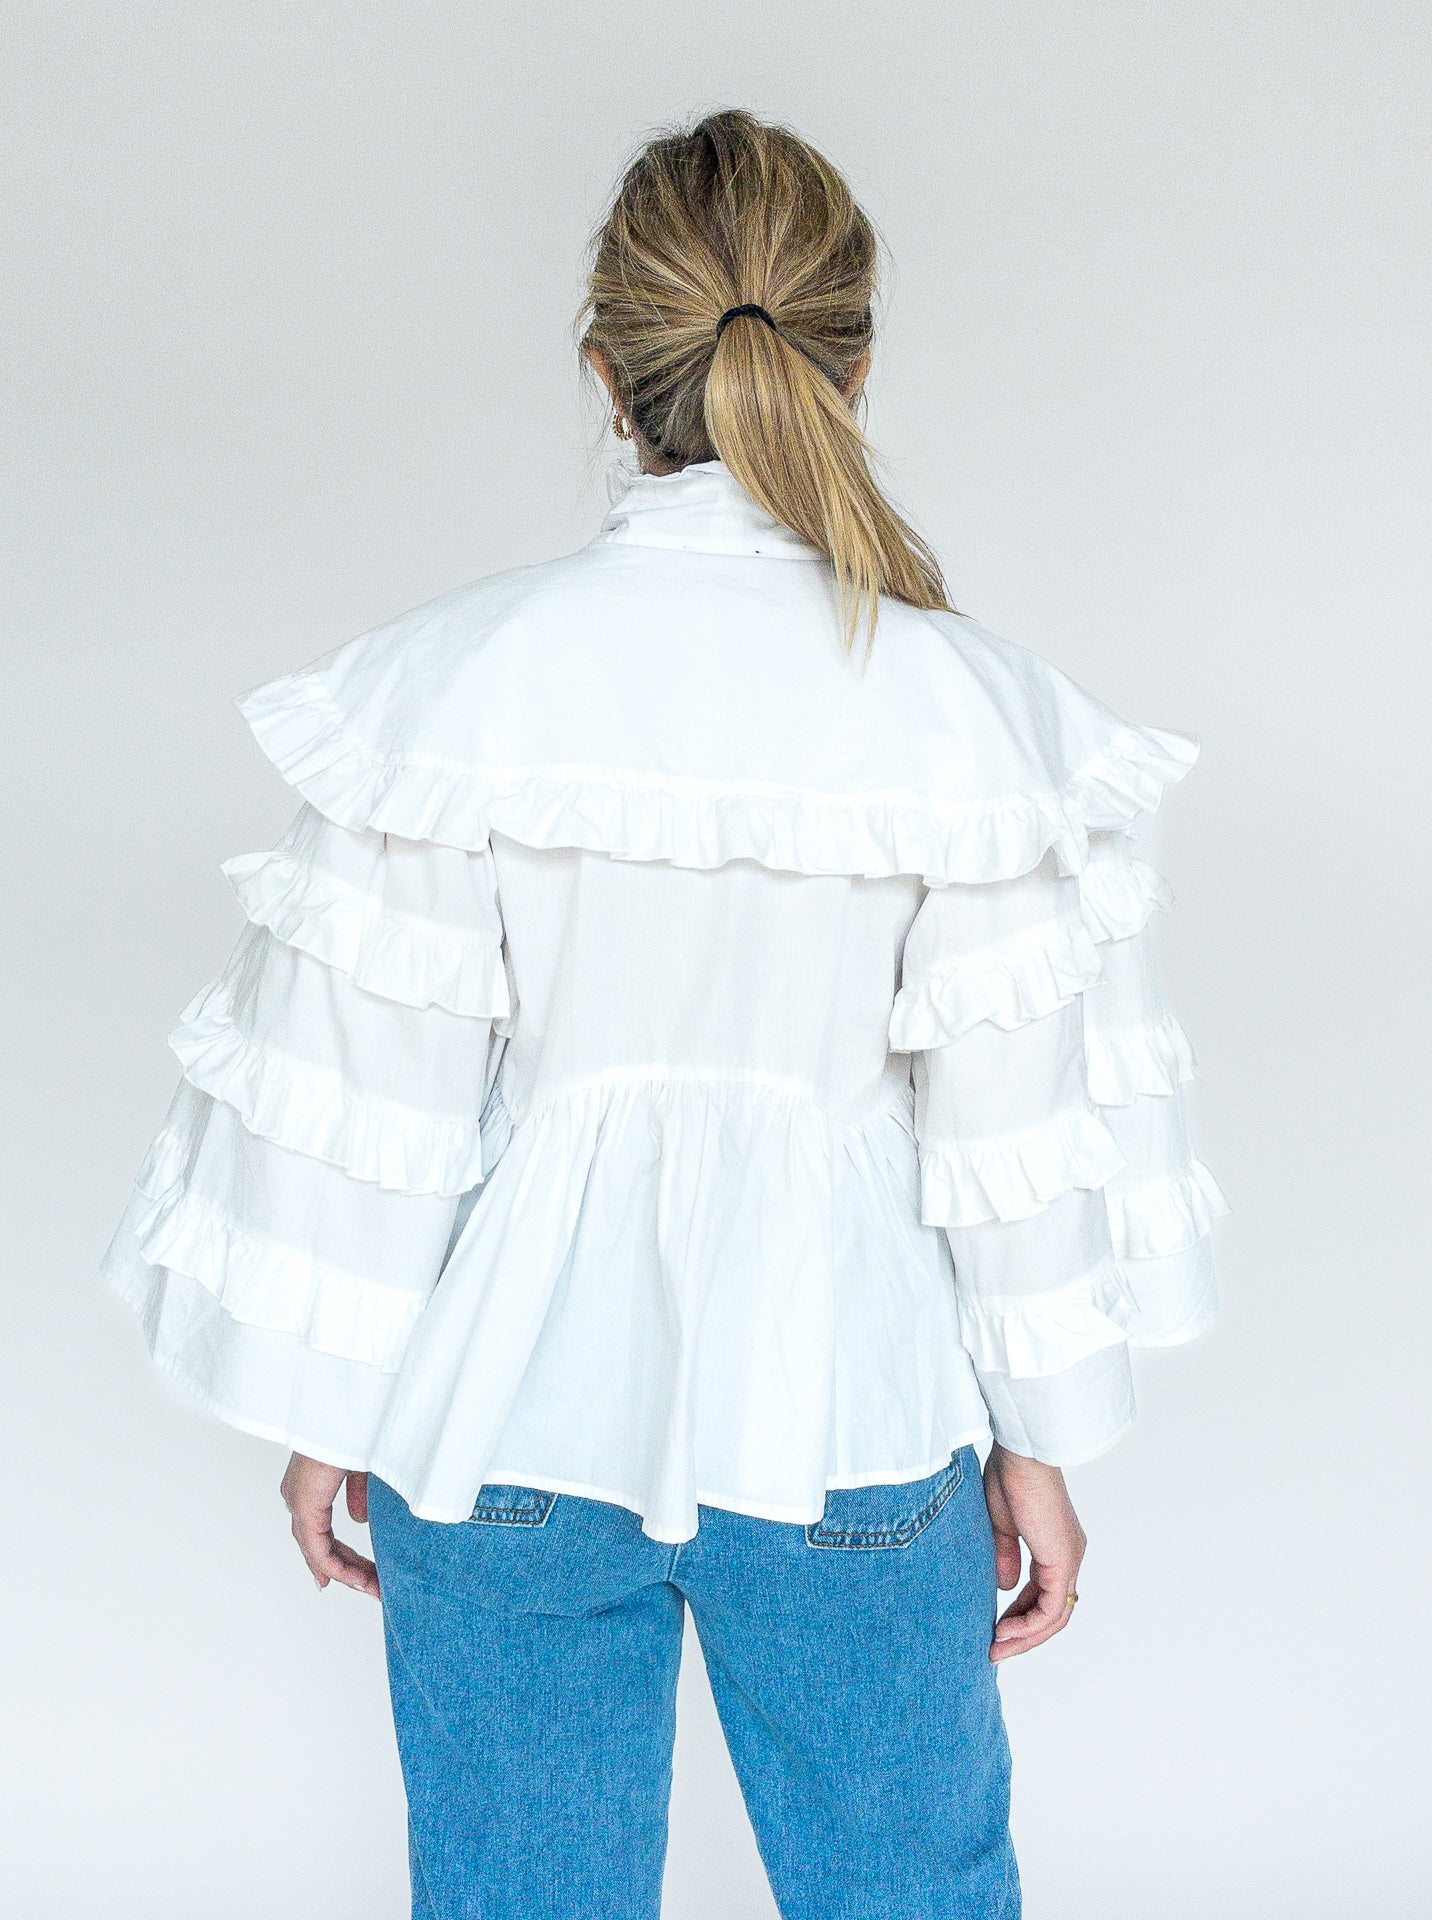 sister jane, metropolis bow ruffle blouse, white, women&#39;s blouse, spanish blouse, bow blouse, fashion, apparel, ethically made, curate, shopthecurate